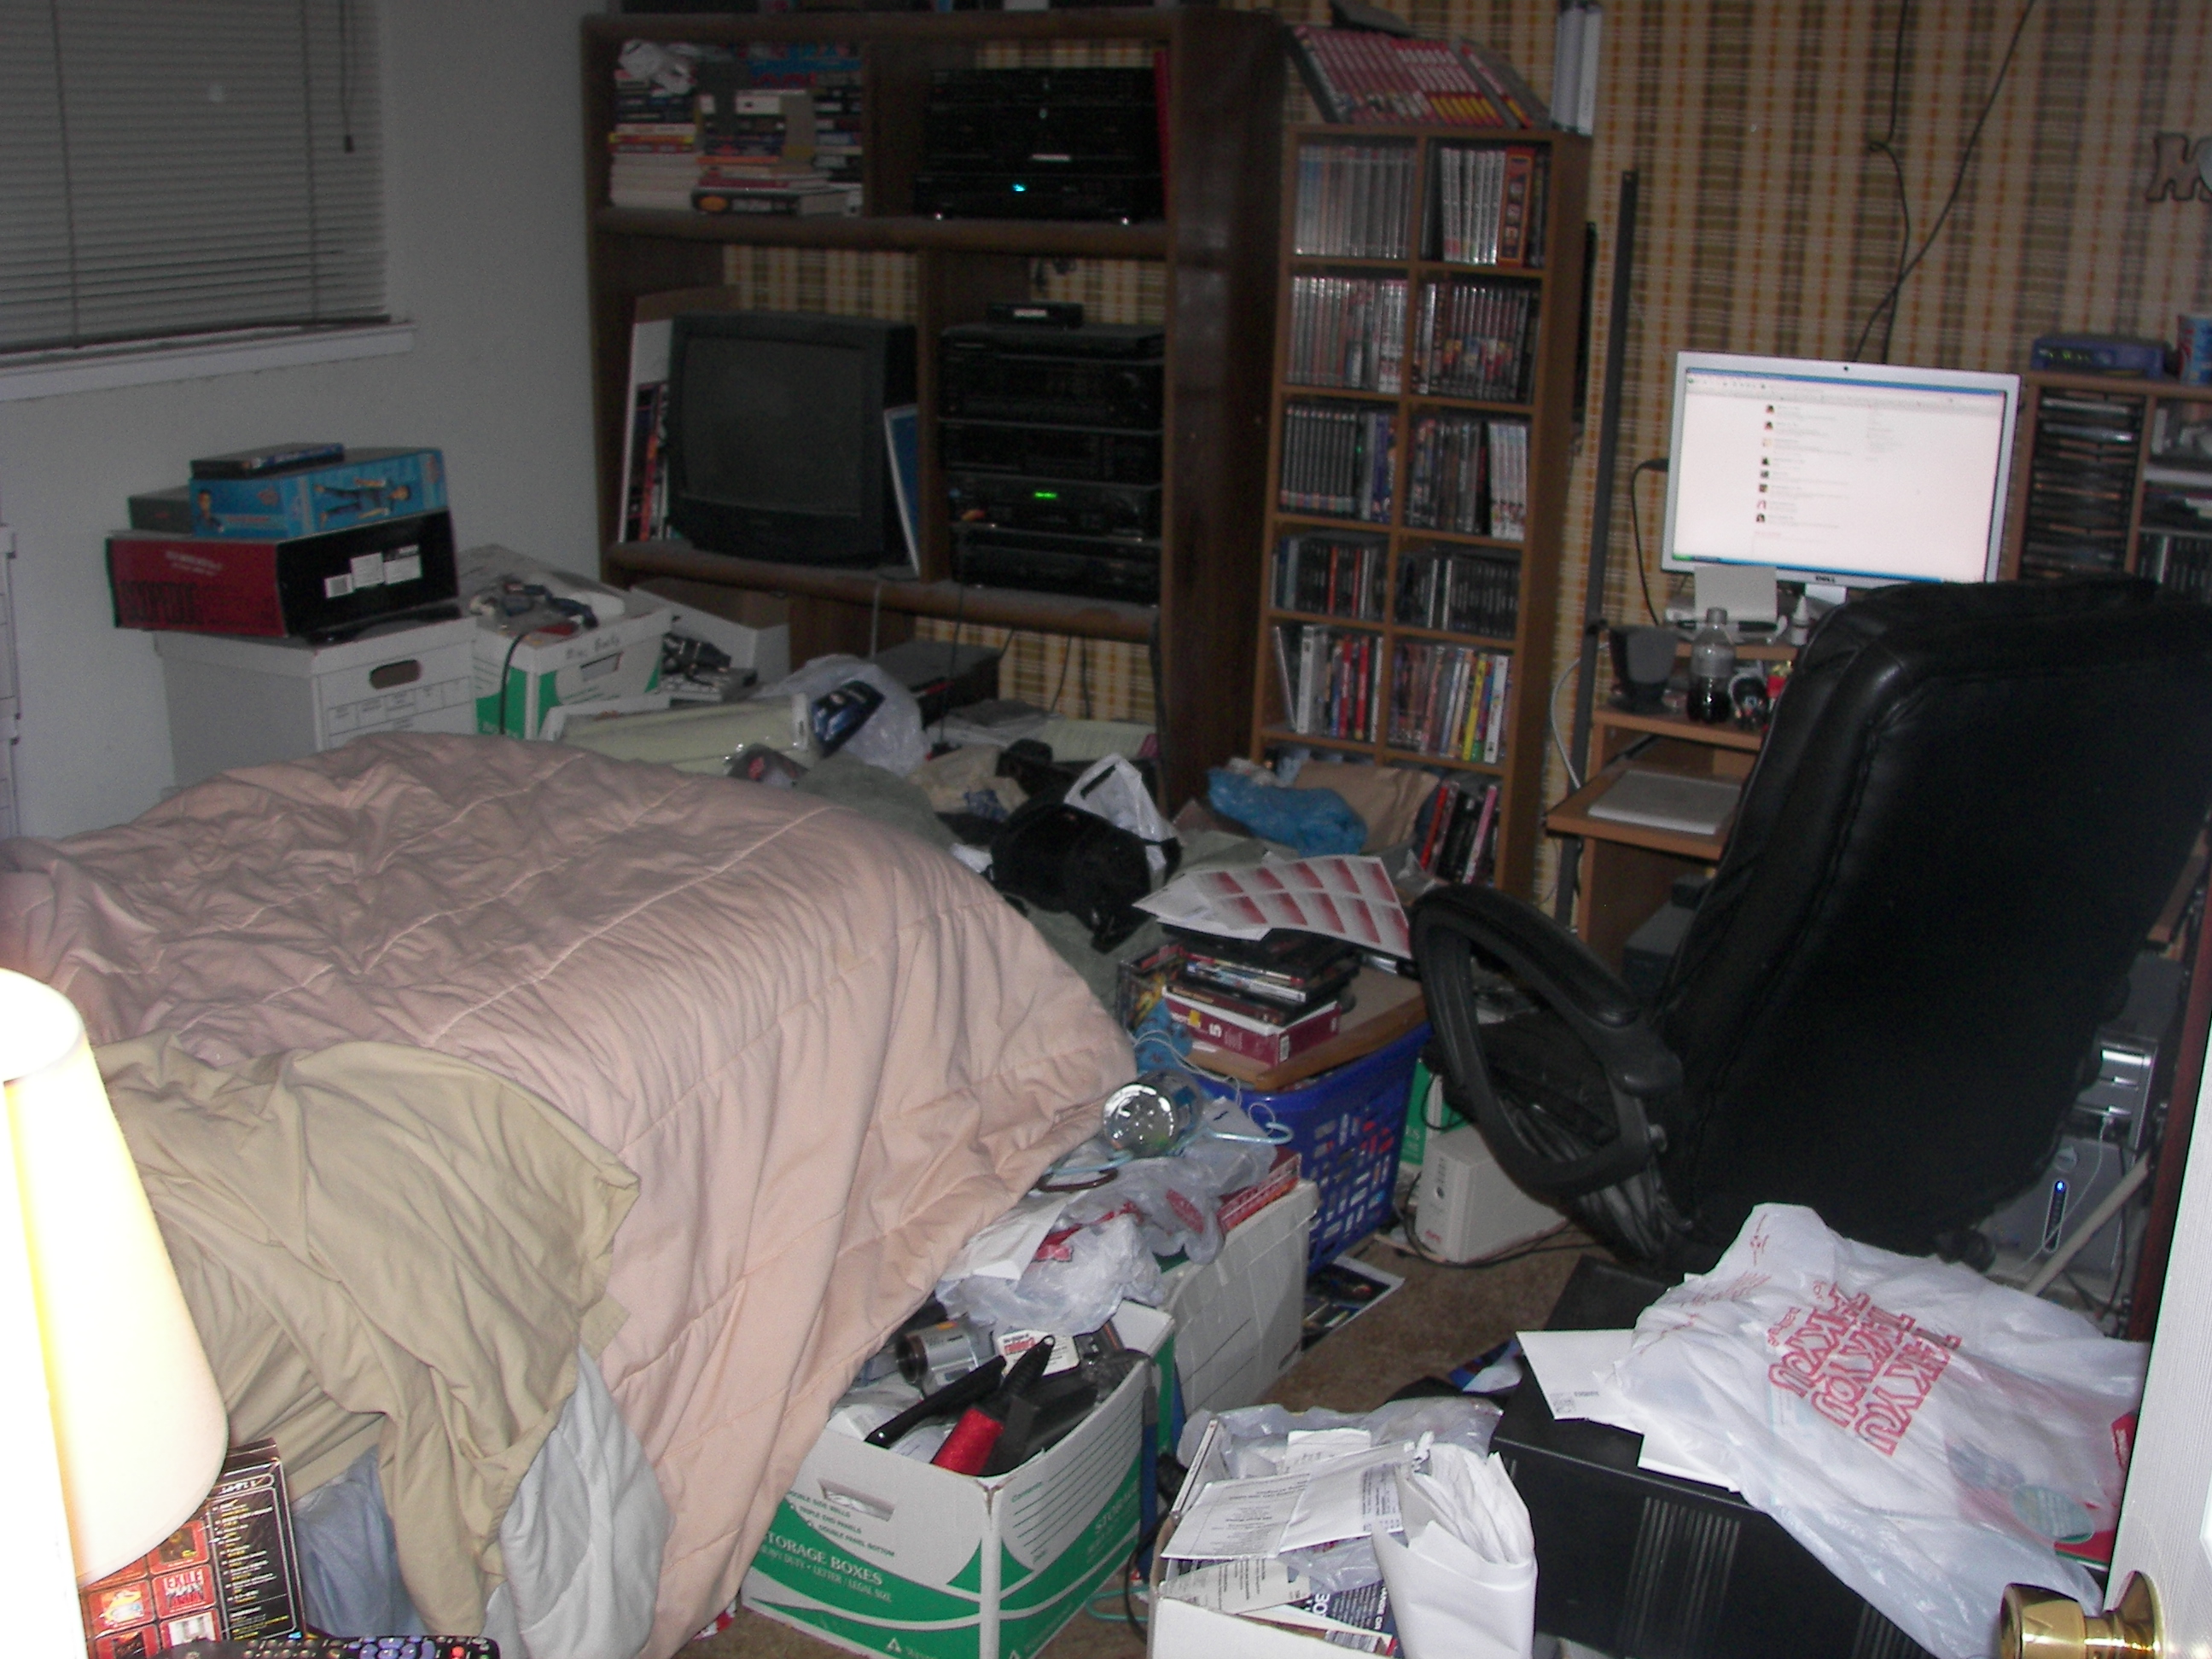 My Room - Looks Like I've Got My Work Cut Out For Me